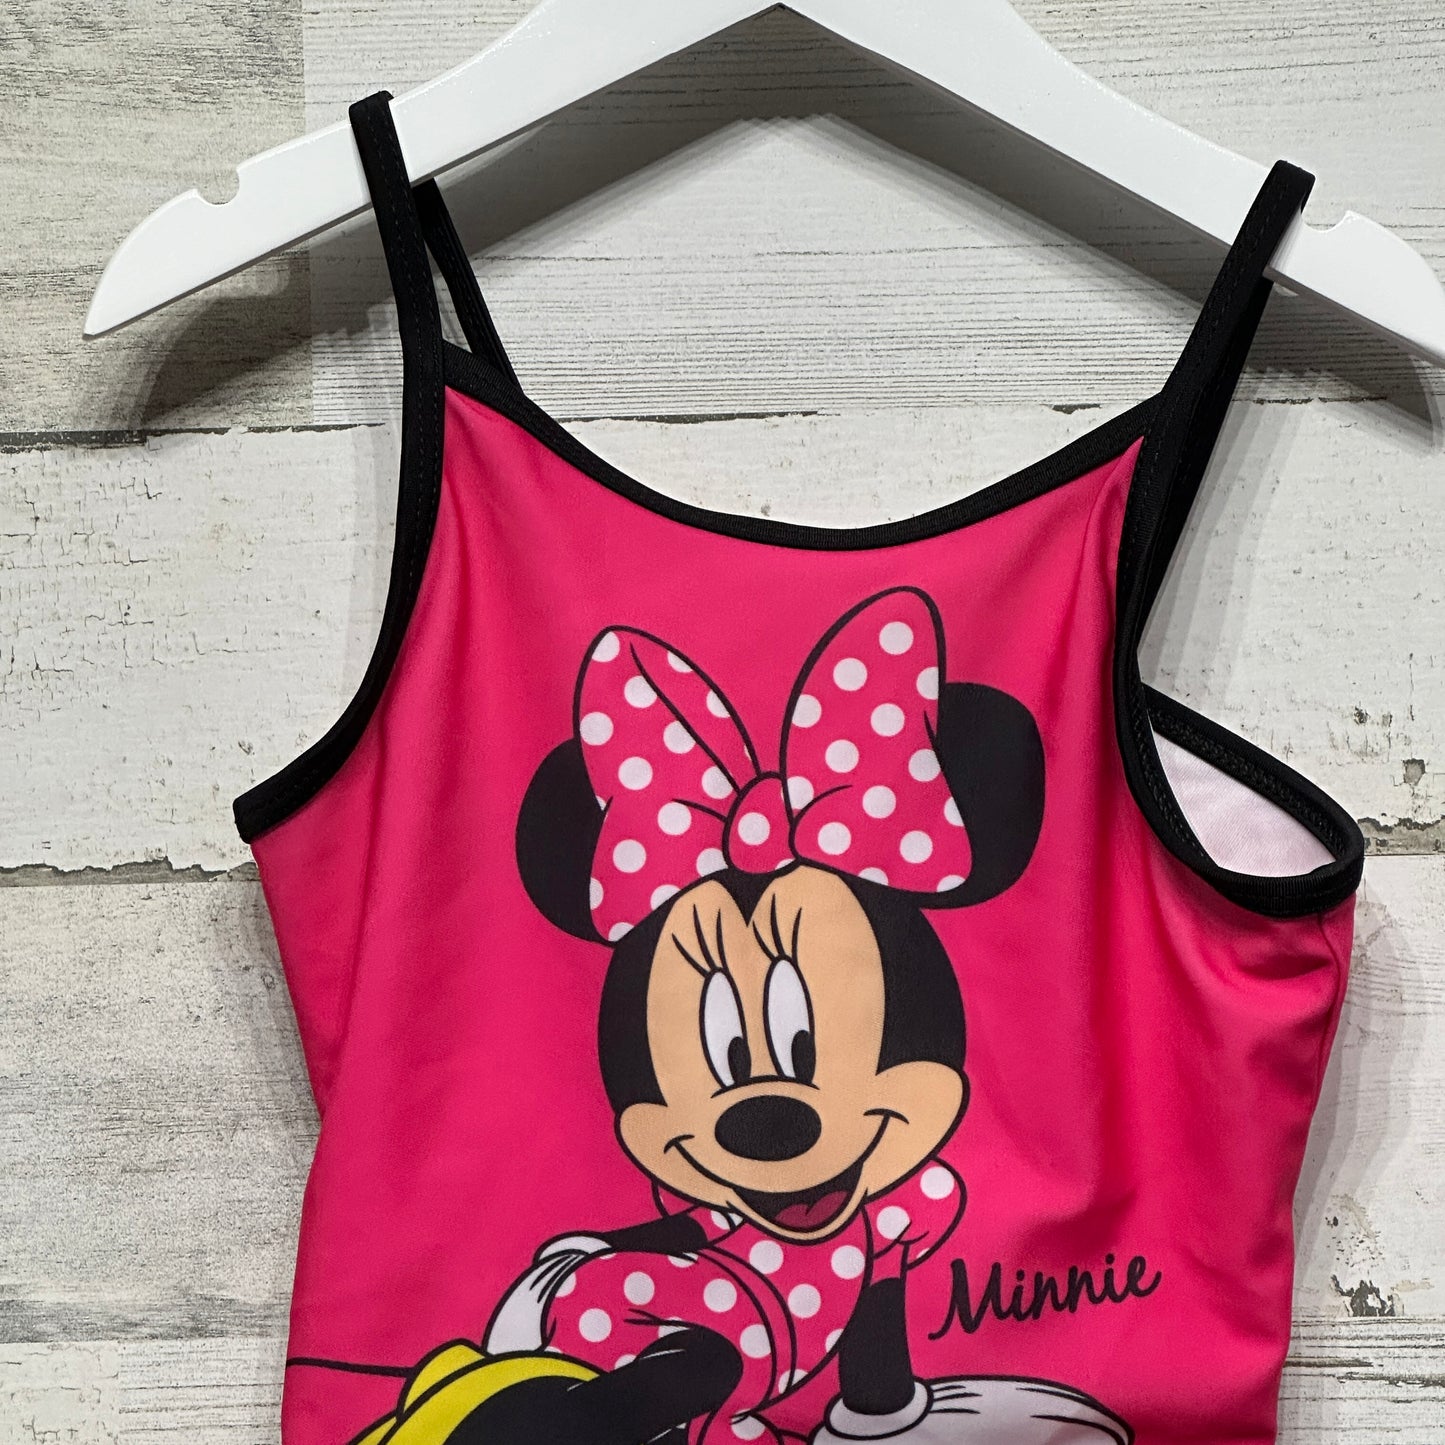 Girls Size 6/6x Disney Minnie Mouse Swim Top - Good Used Condition